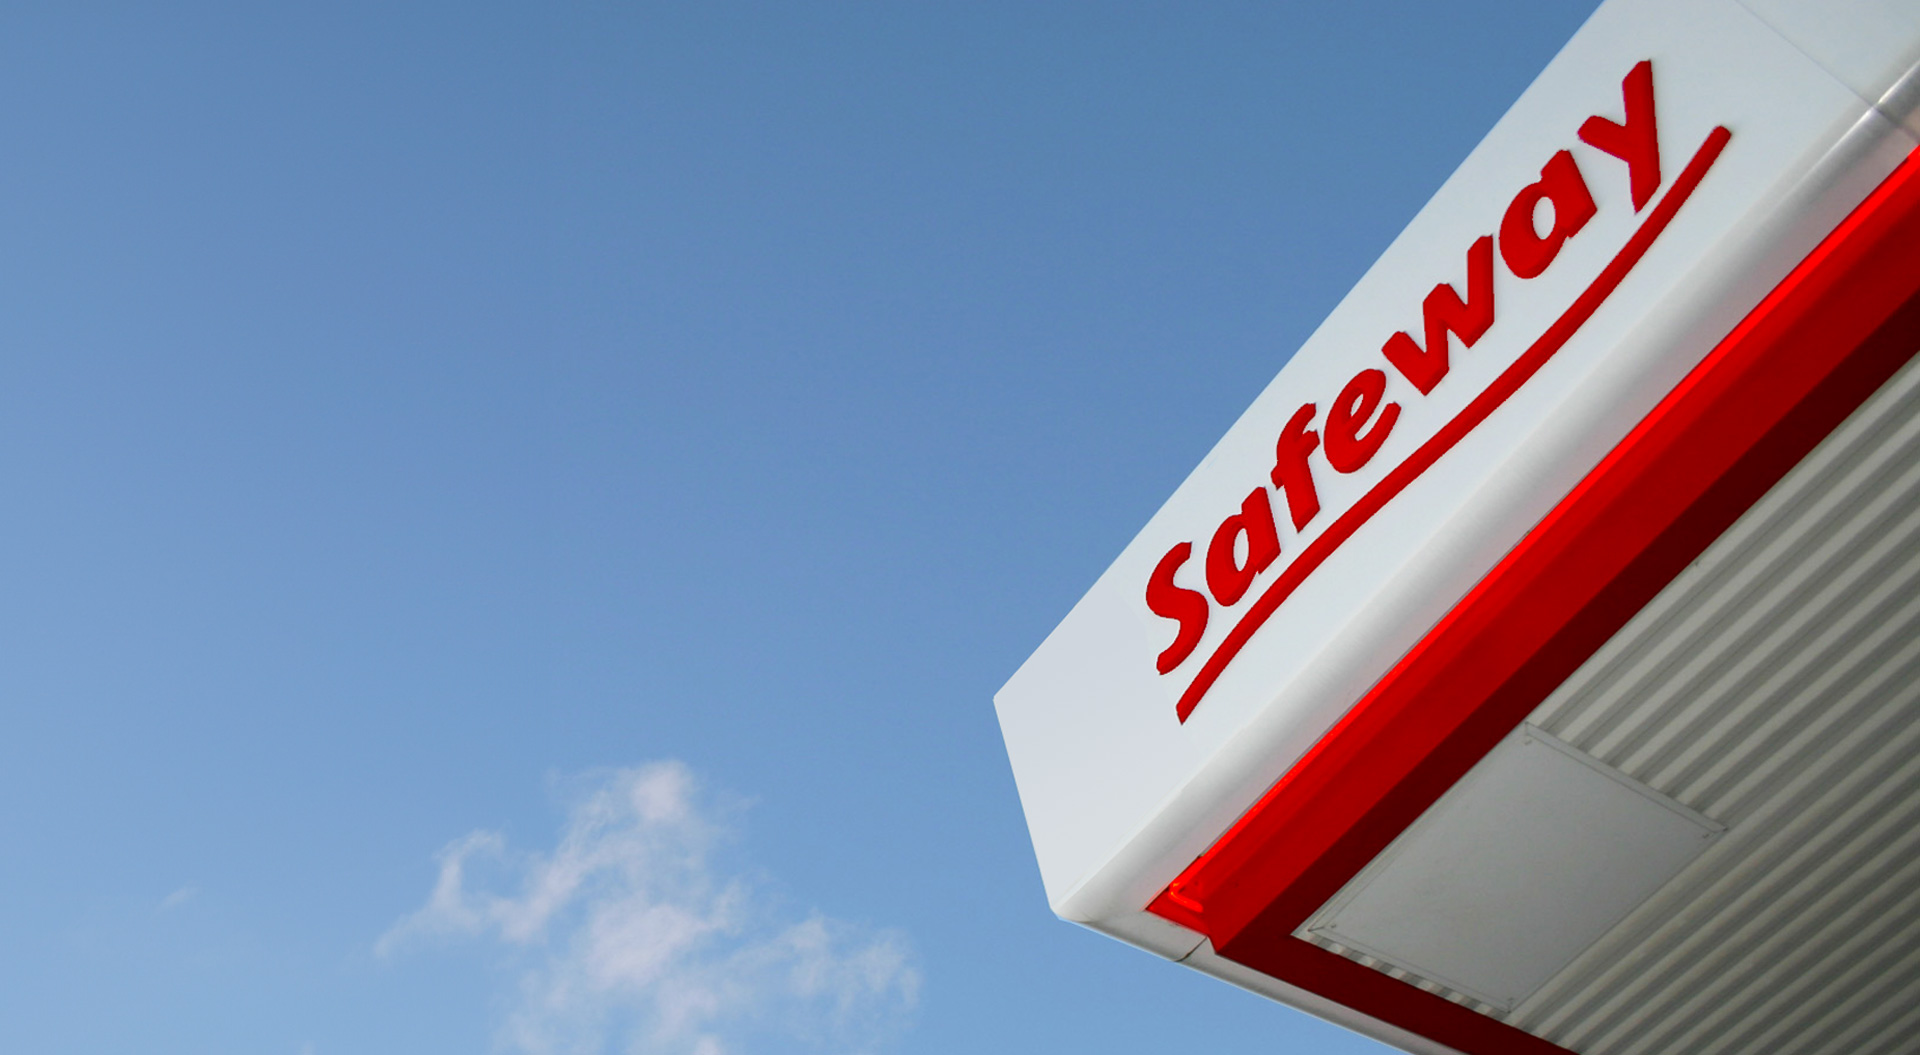 Safeway Petrol forecourt branding, design, retail, filling stations, convenience stores, brand identity